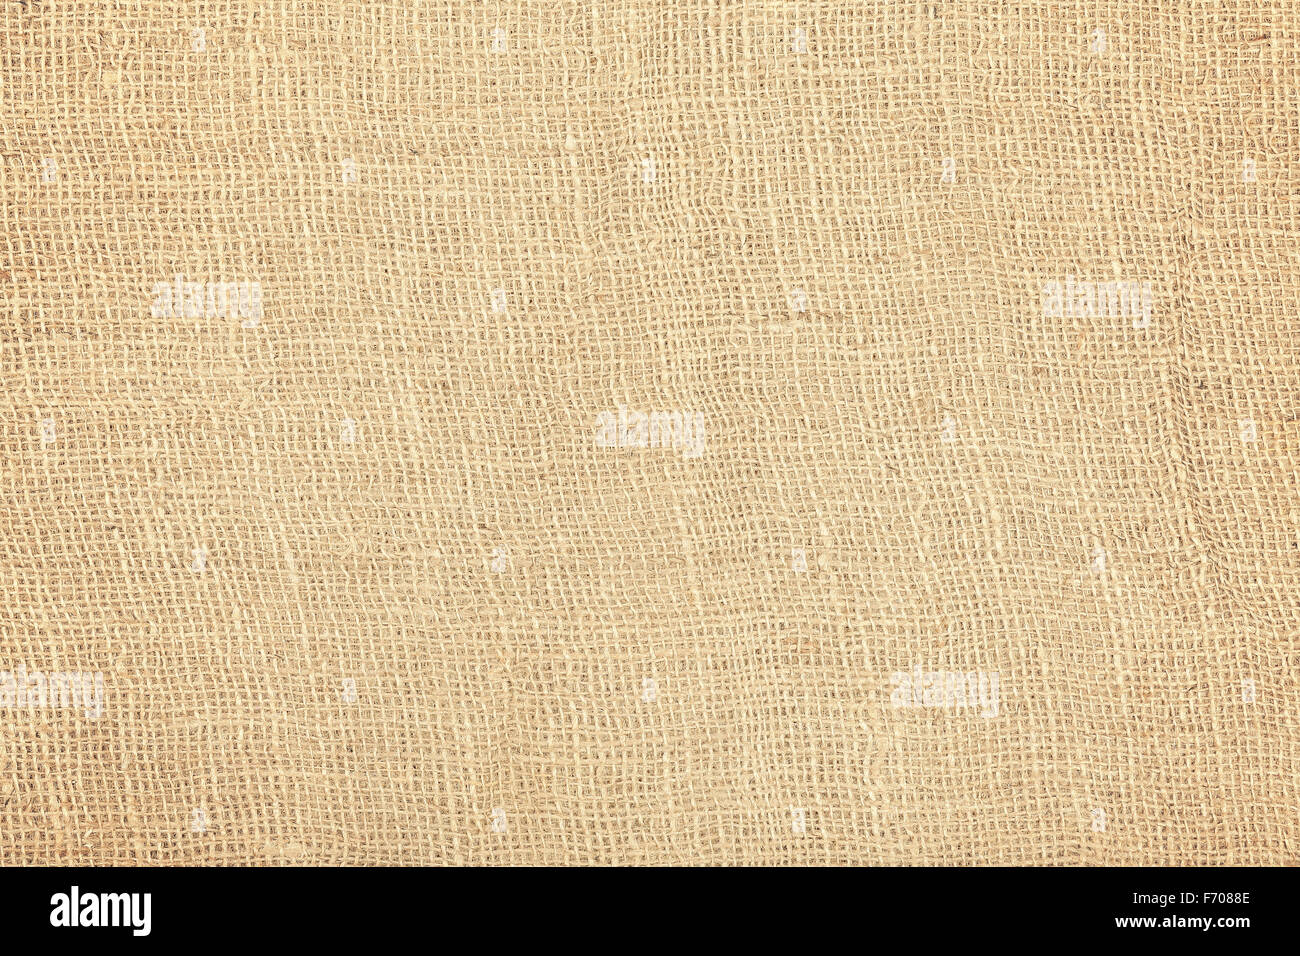 Rough jute fabric natural texture or background. Stock Photo